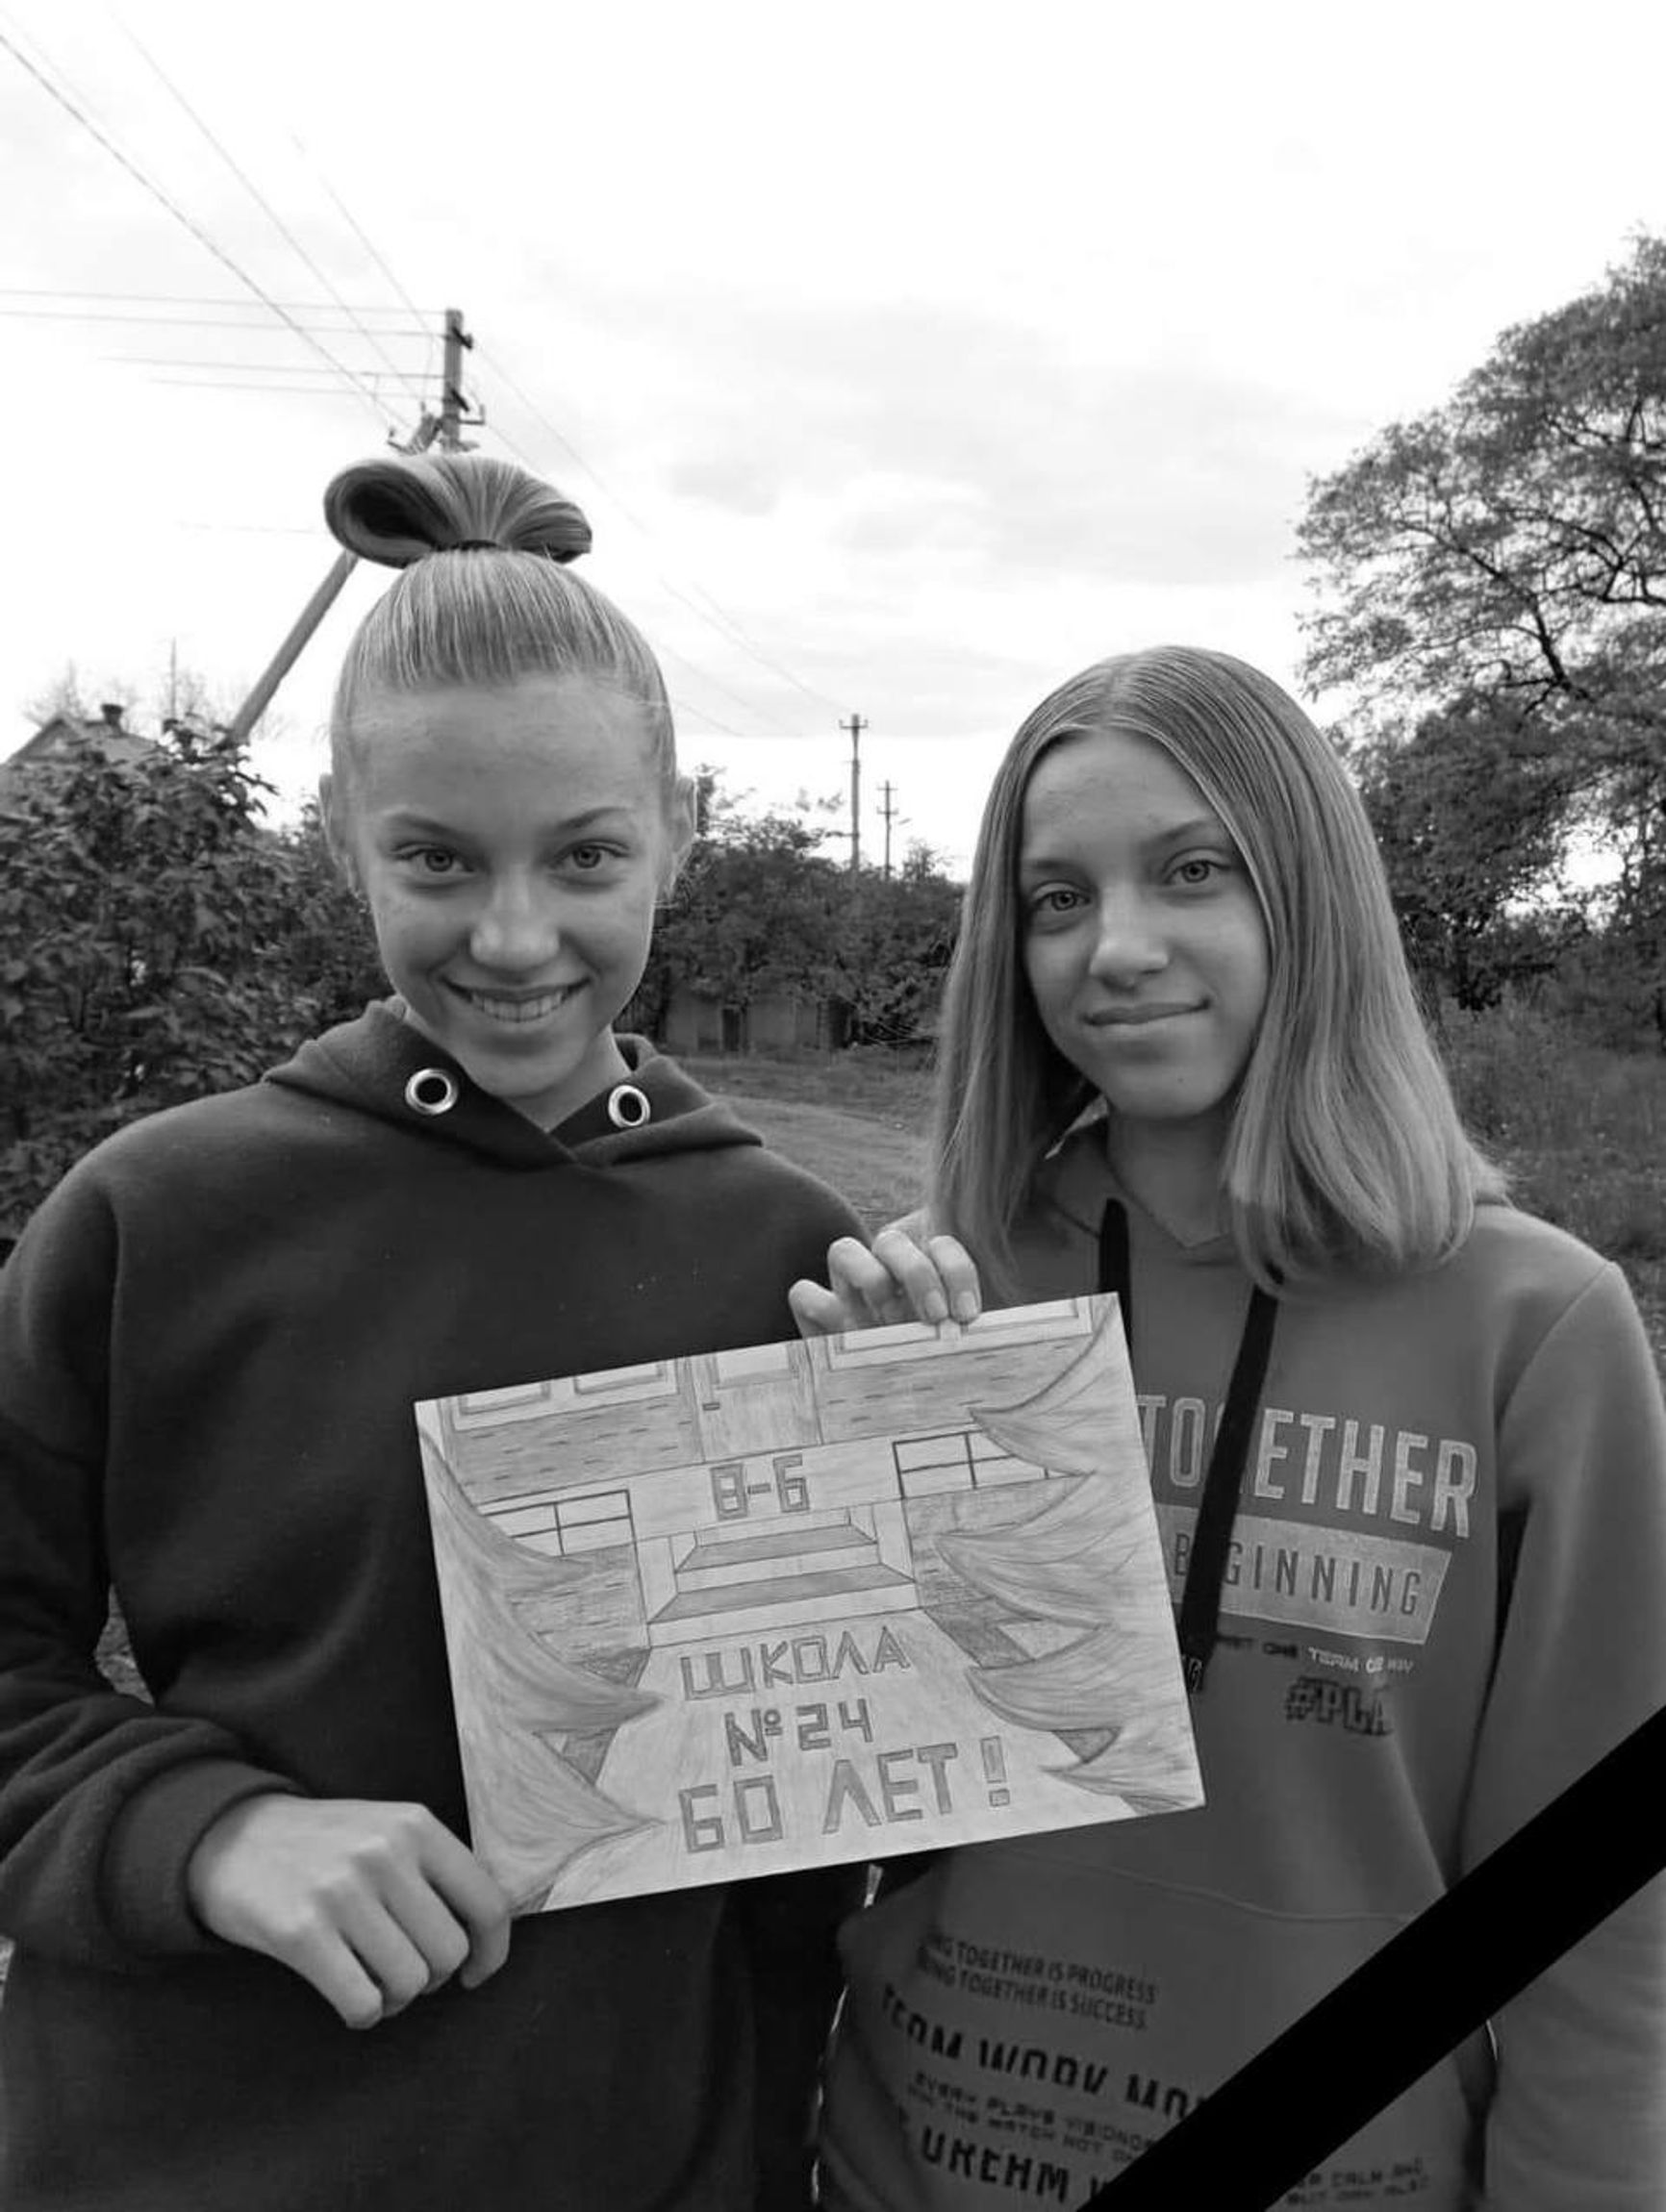 Yulia and Anna Aksenchenko, Kramatorsk. Students of school #24. They would have been 15 years old on September 4.